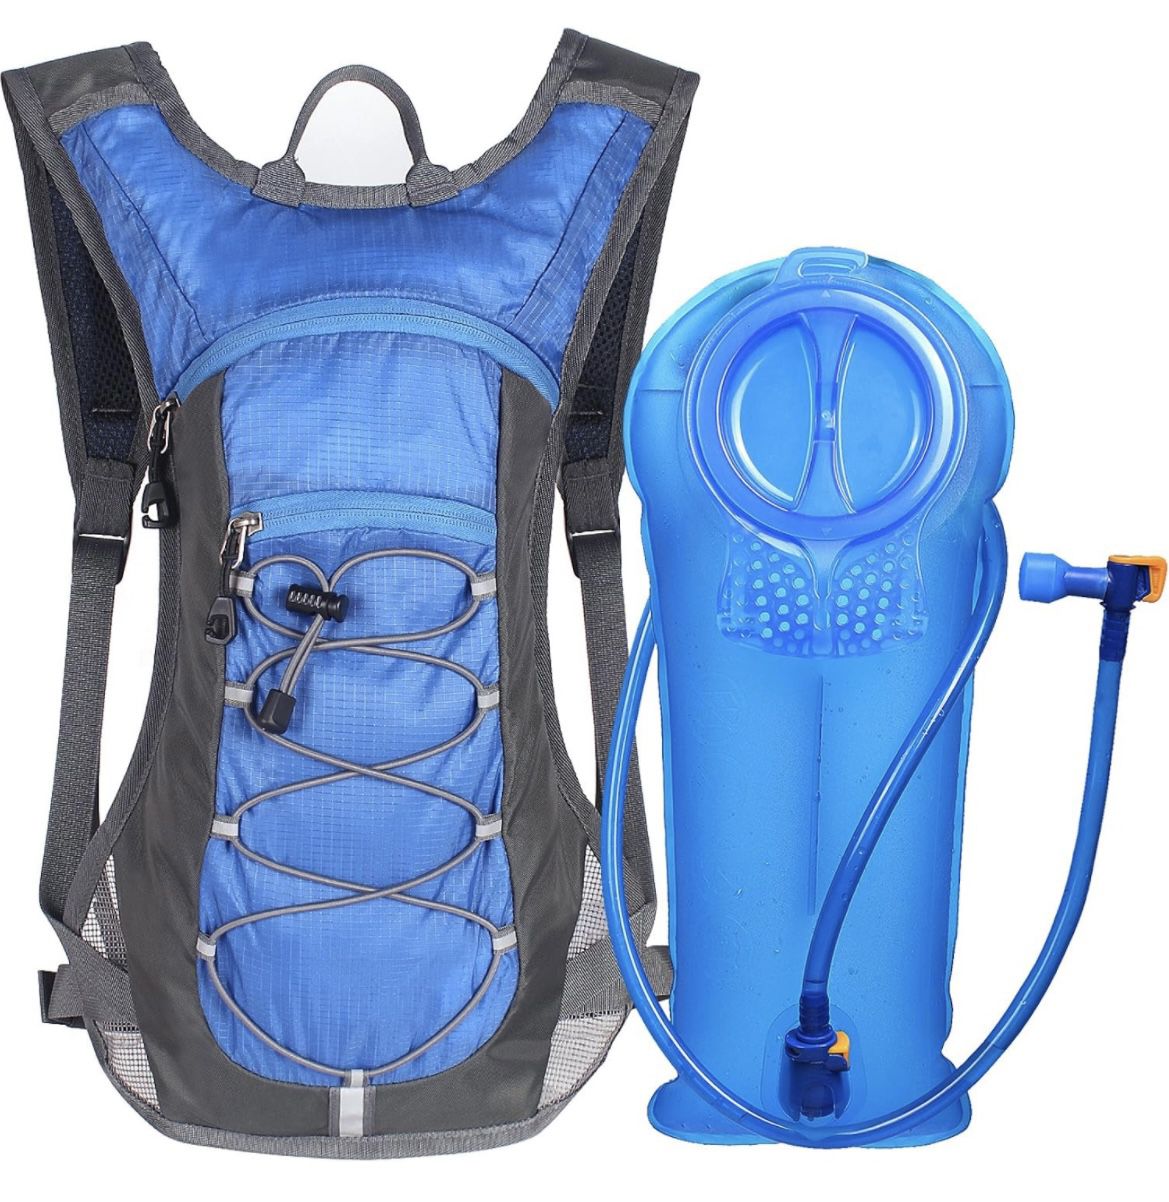 New Unigear 2 liter hydration backpacks. Check my other listings for more great items.